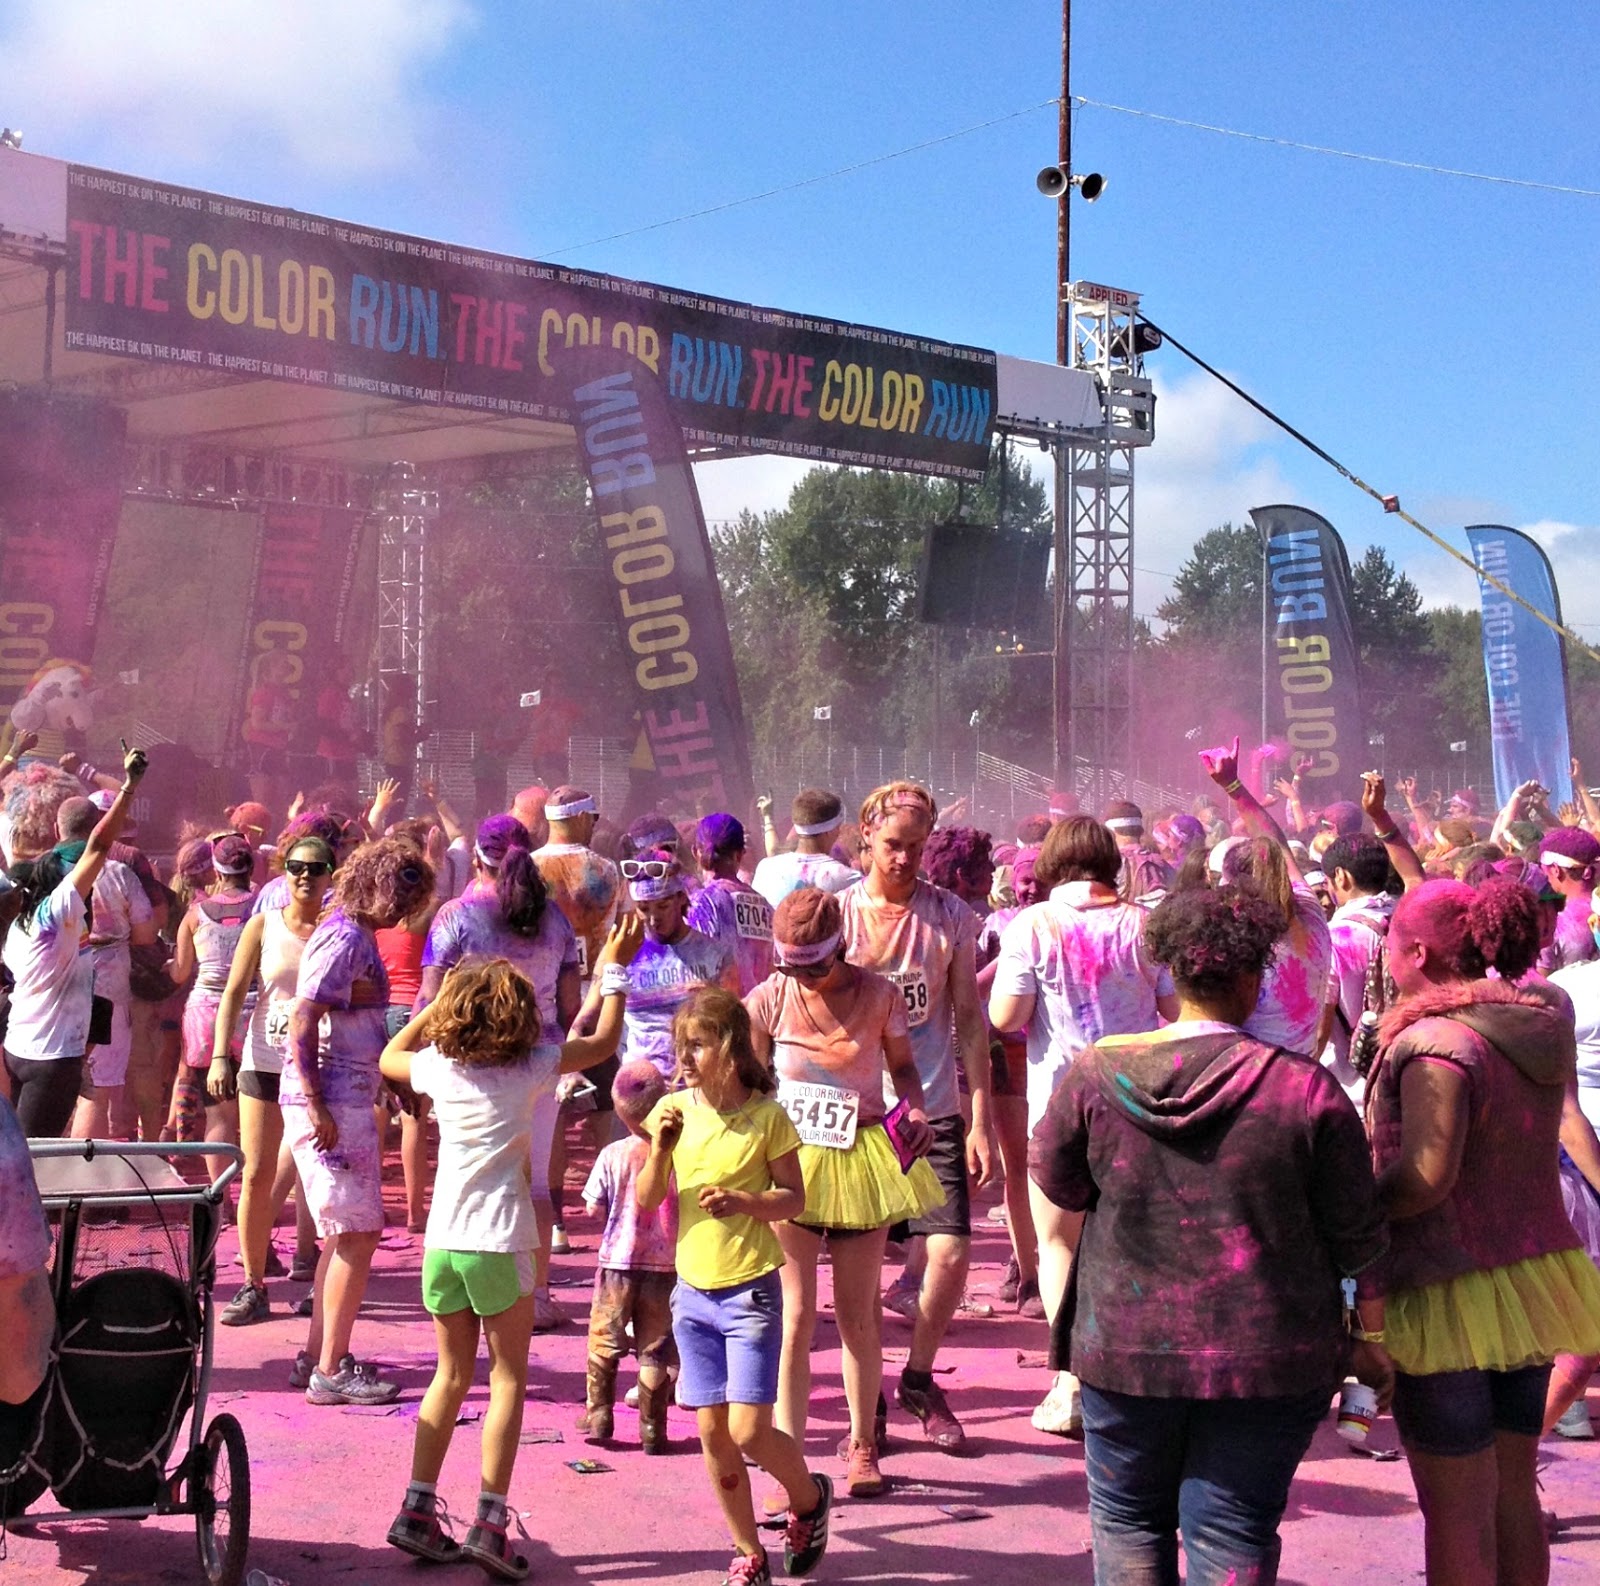 We Participated In The Color Run! Thanks For Getting Us There Chevy!